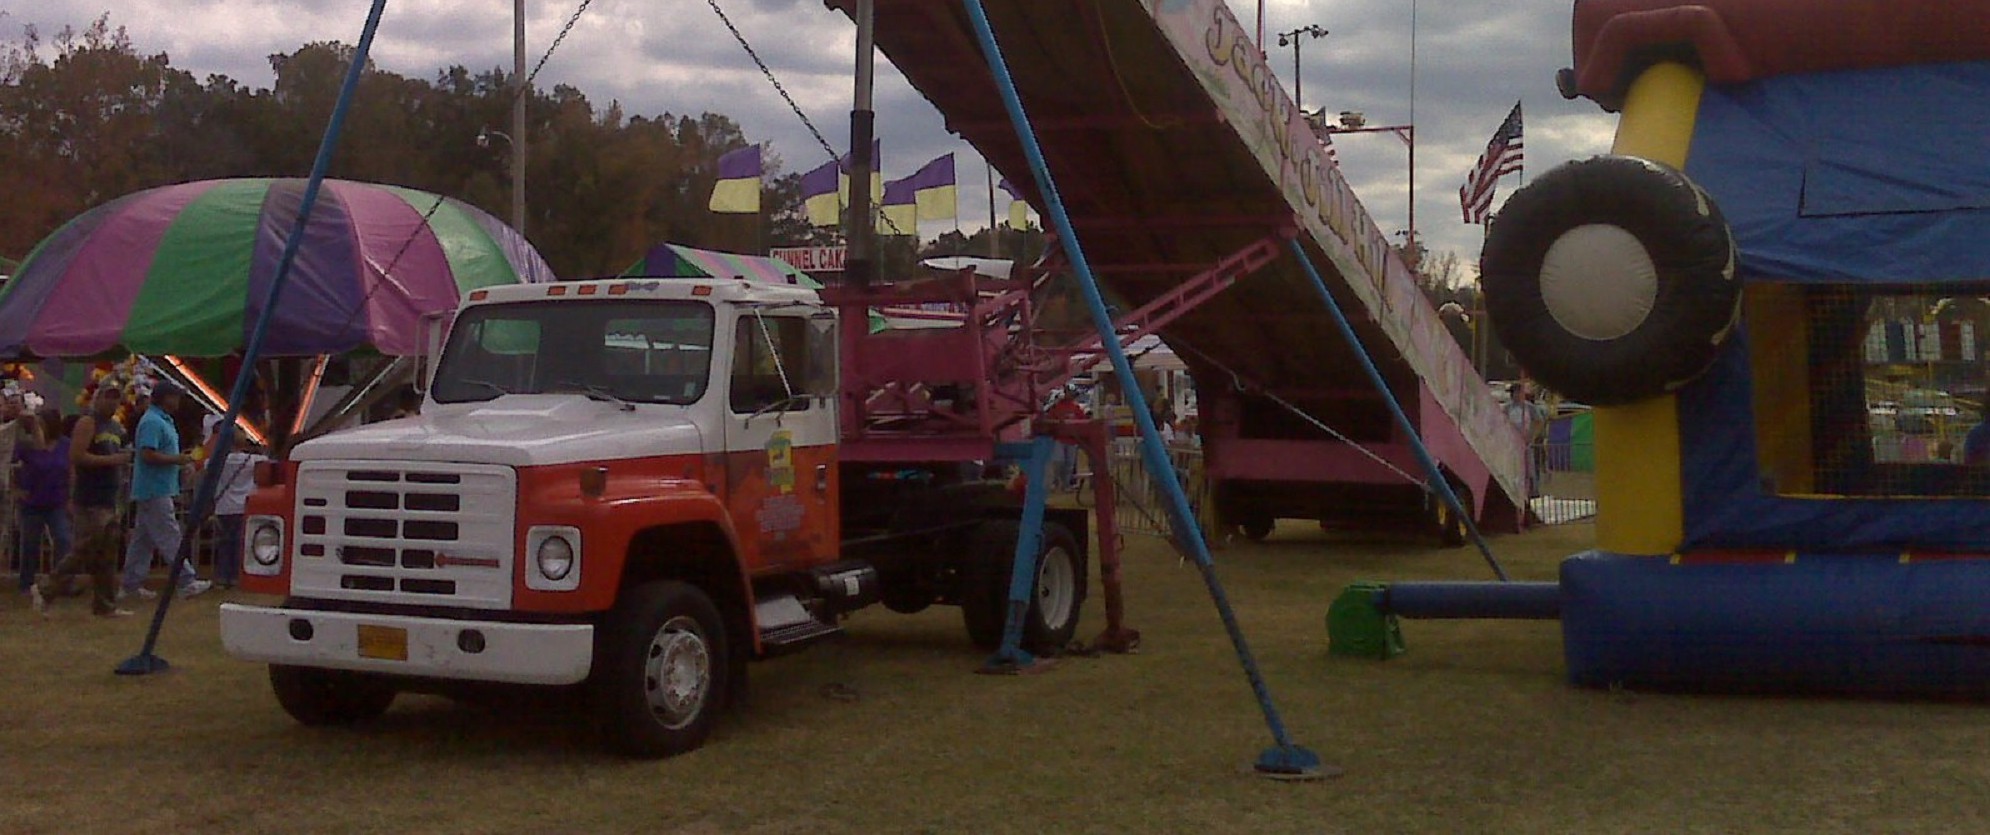 For-sale U-Haul Truck converted to a carnival slide